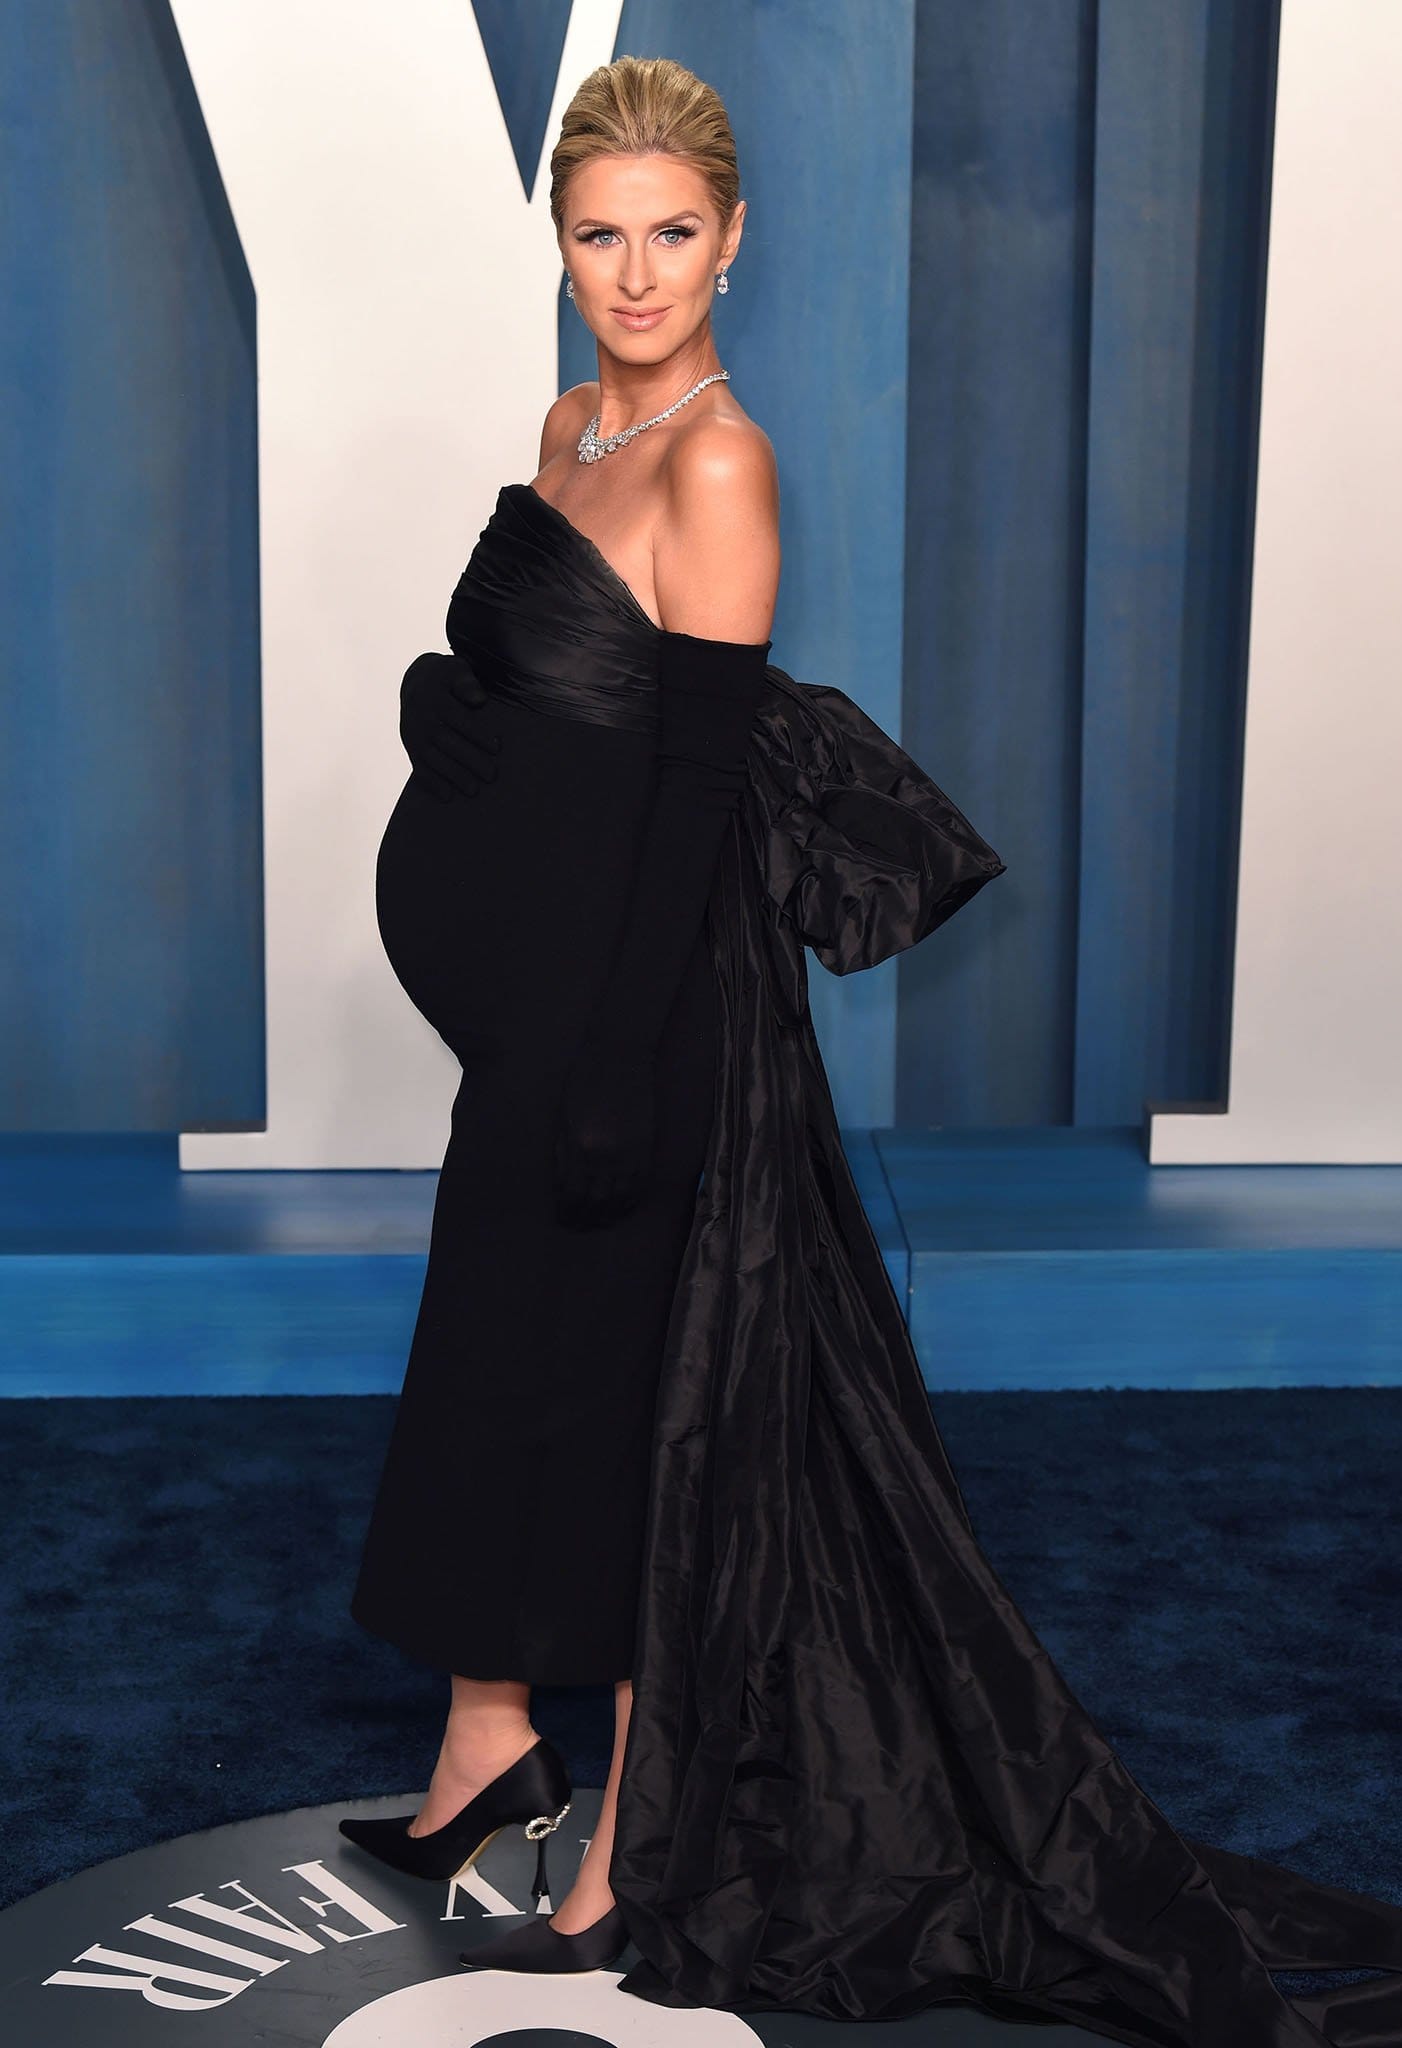 Nicky Hilton showcases her baby bump in a custom form-fitting Oscar de la Renta gown and a pair of Mach and Mach pumps with crystal bow-detailed heels